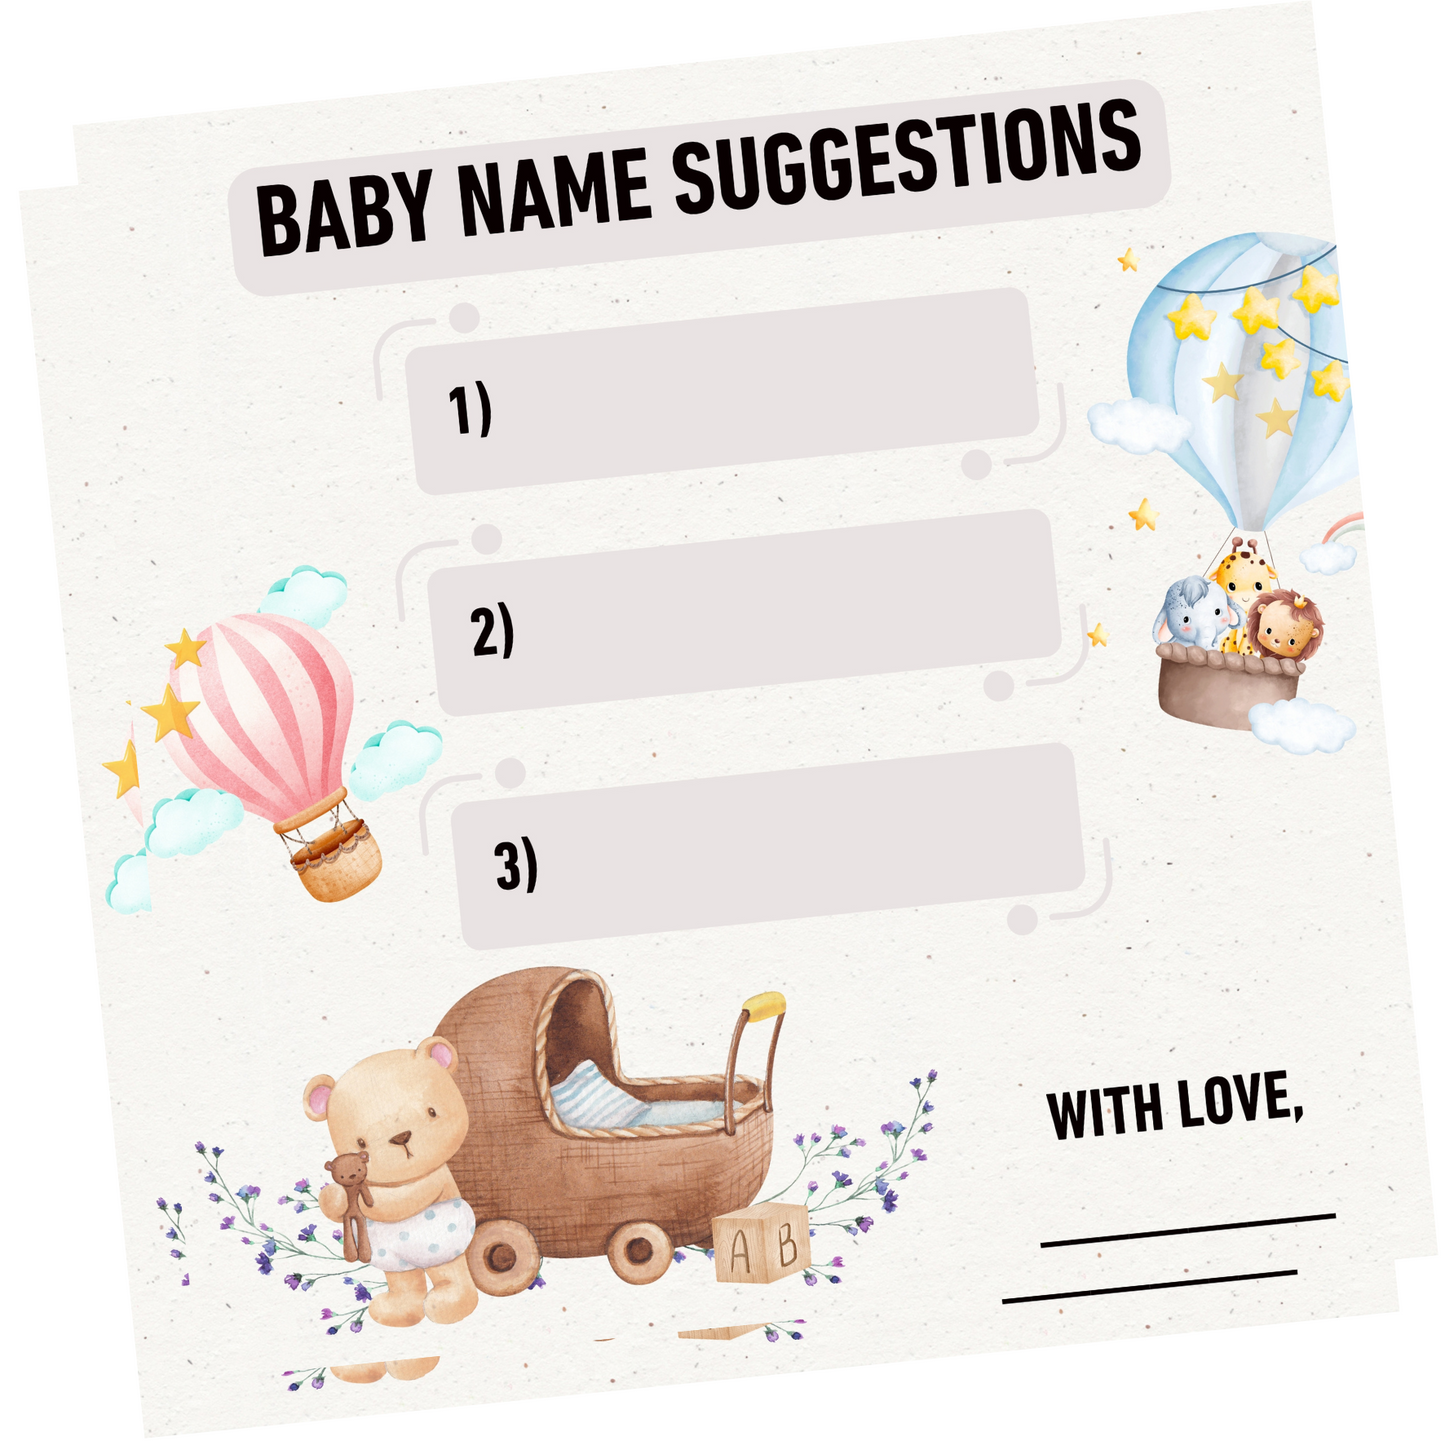 Baby Name Suggestions, Teddy and para Theme